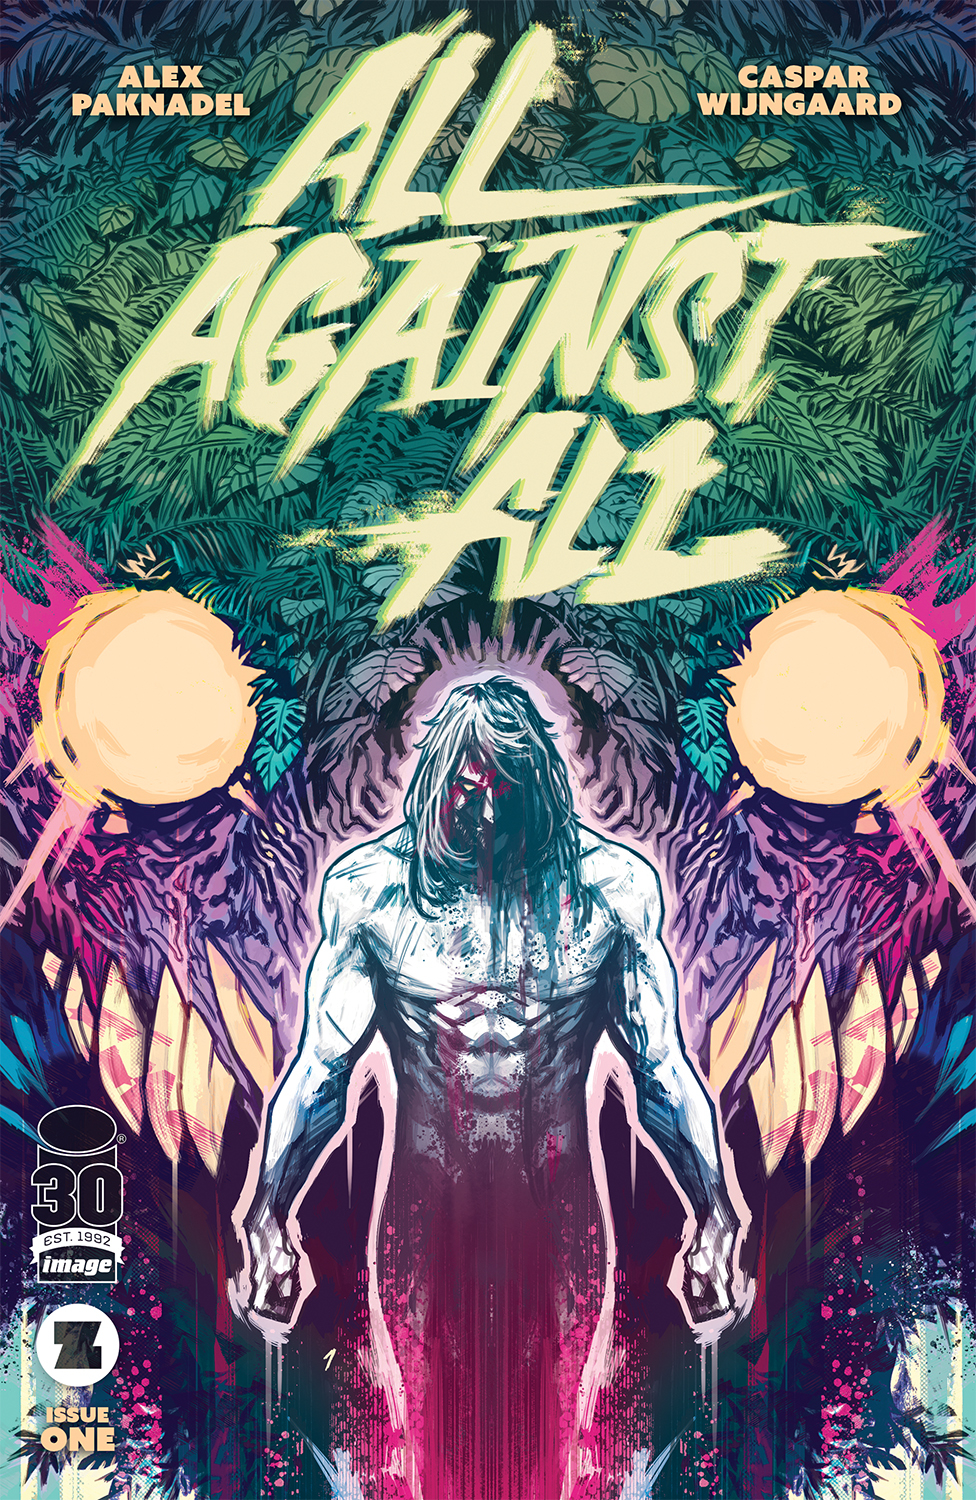 All Against All #1 Cover A Wijngaard (Mature) (Of 5)